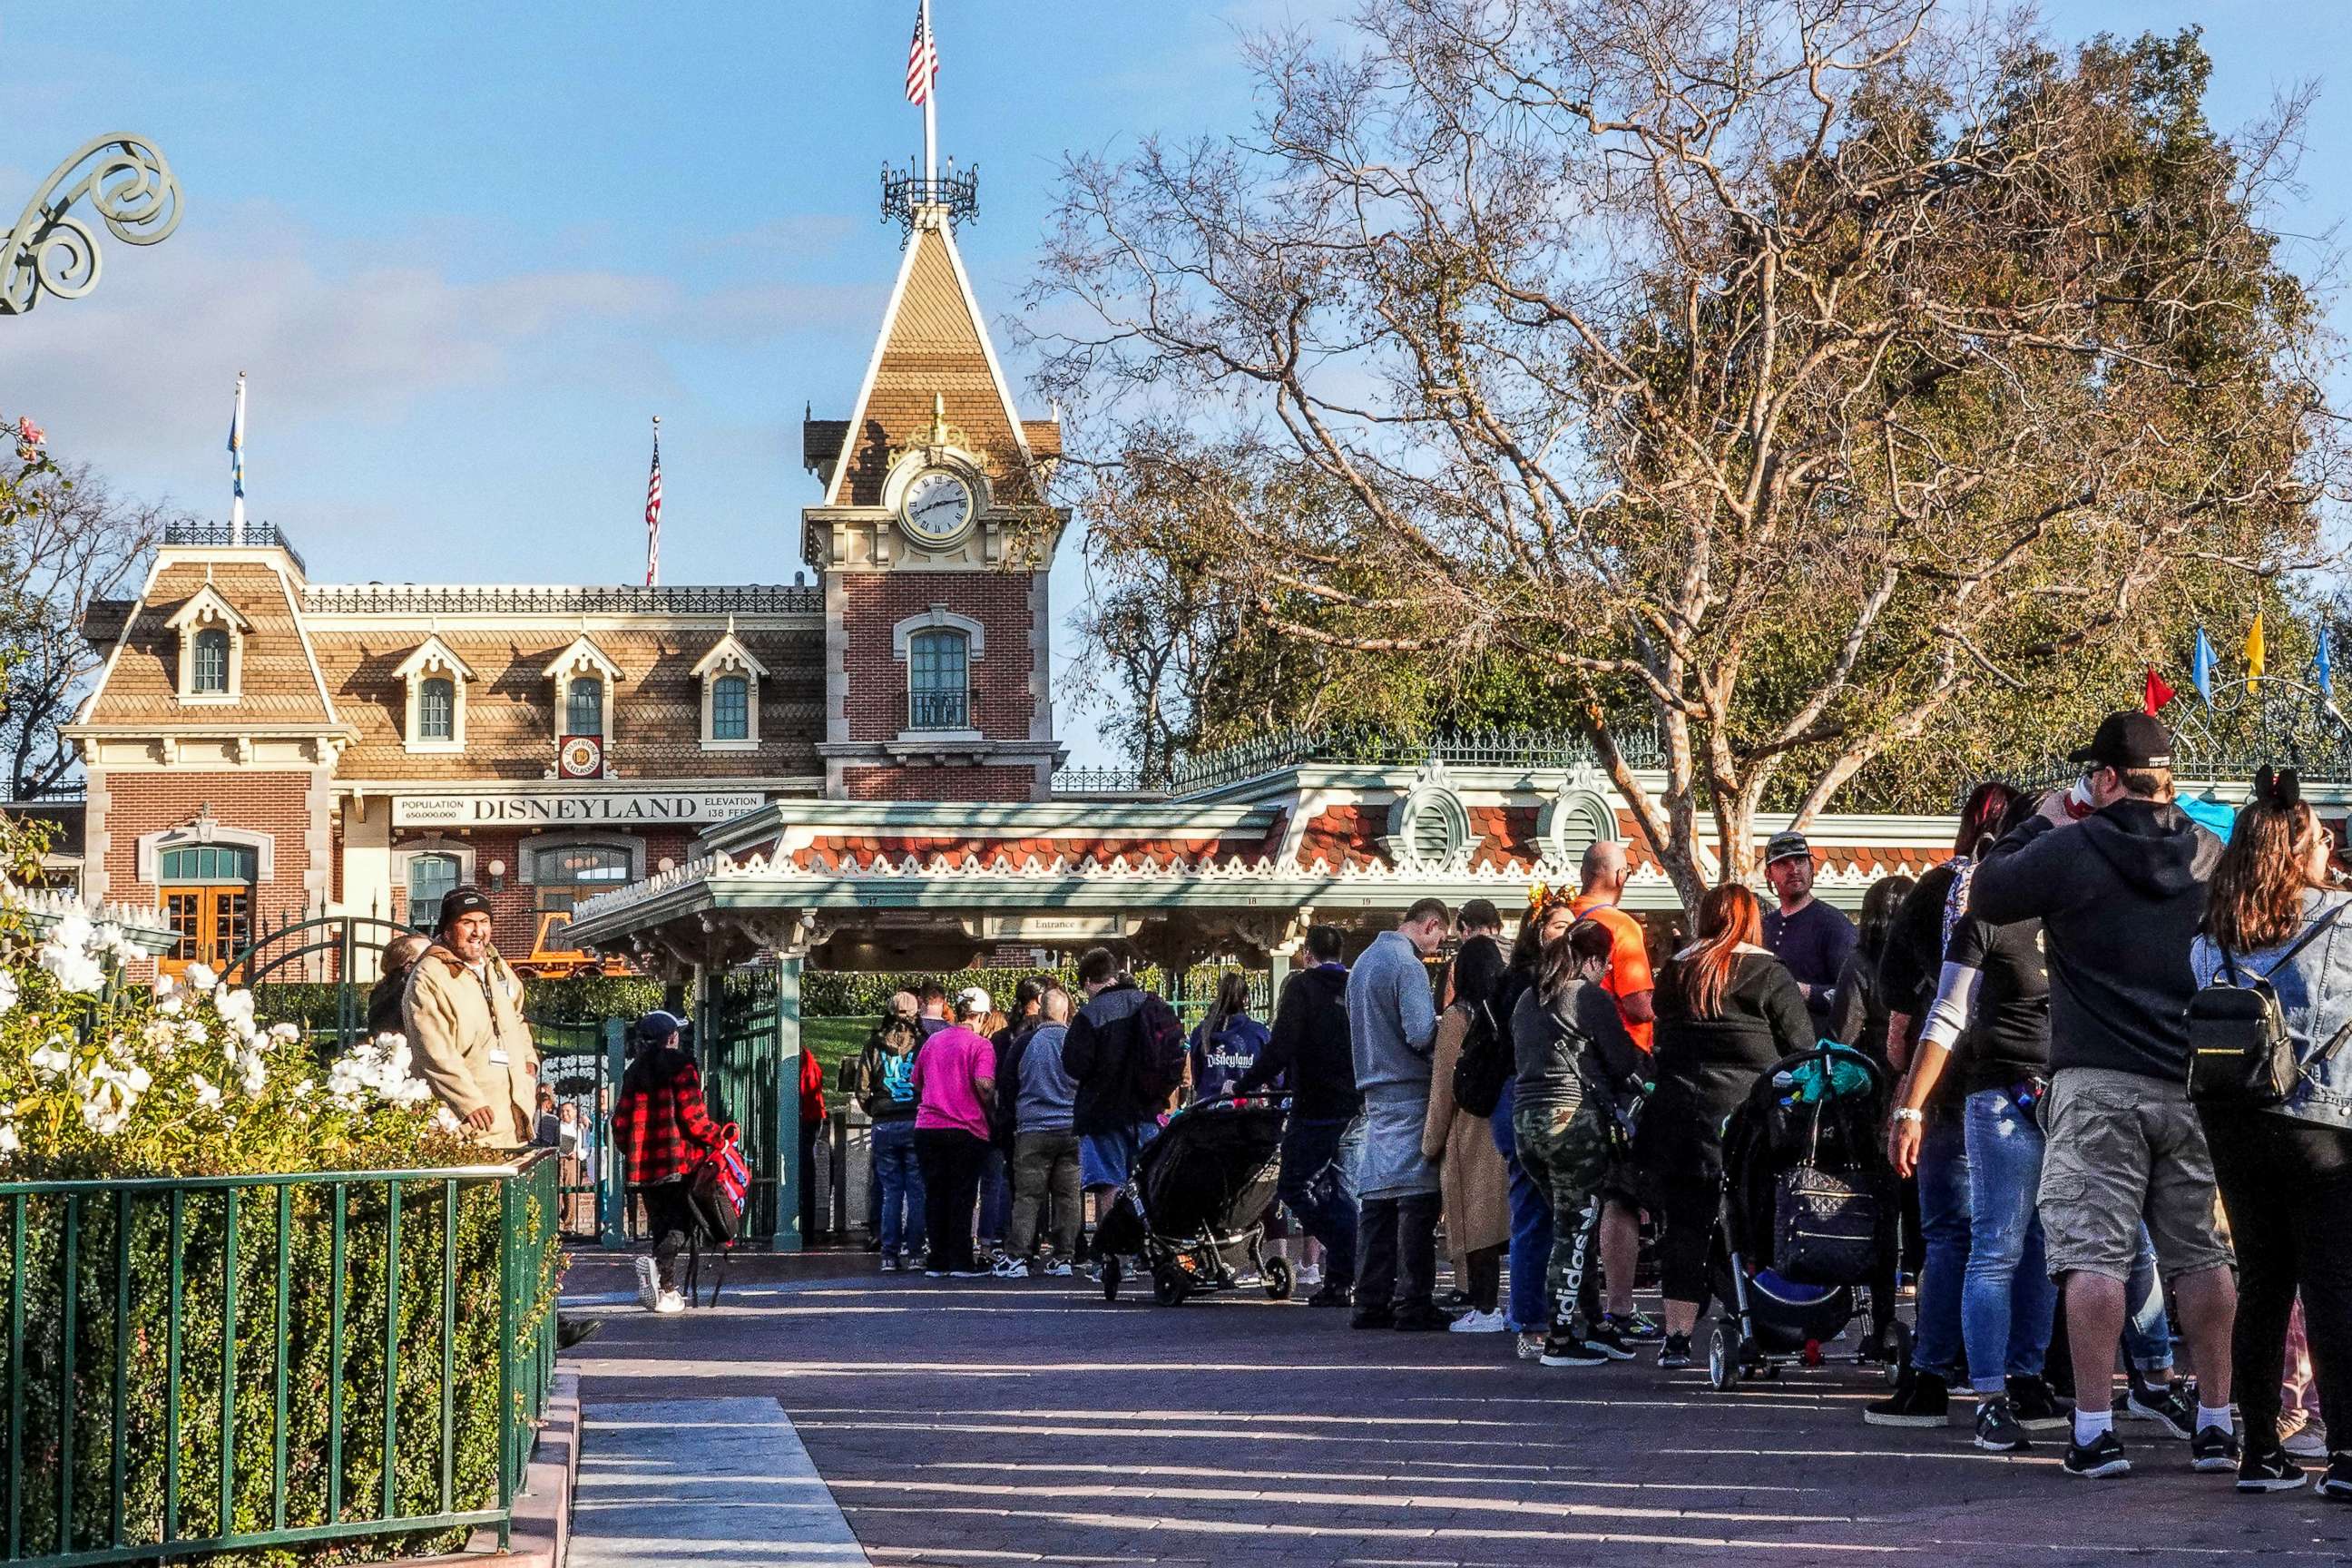 PHOTO: Hundreds of patrons wait in a queue to enter Disneyland Park, Jan. 13, 2020, in Anaheim, Calif.